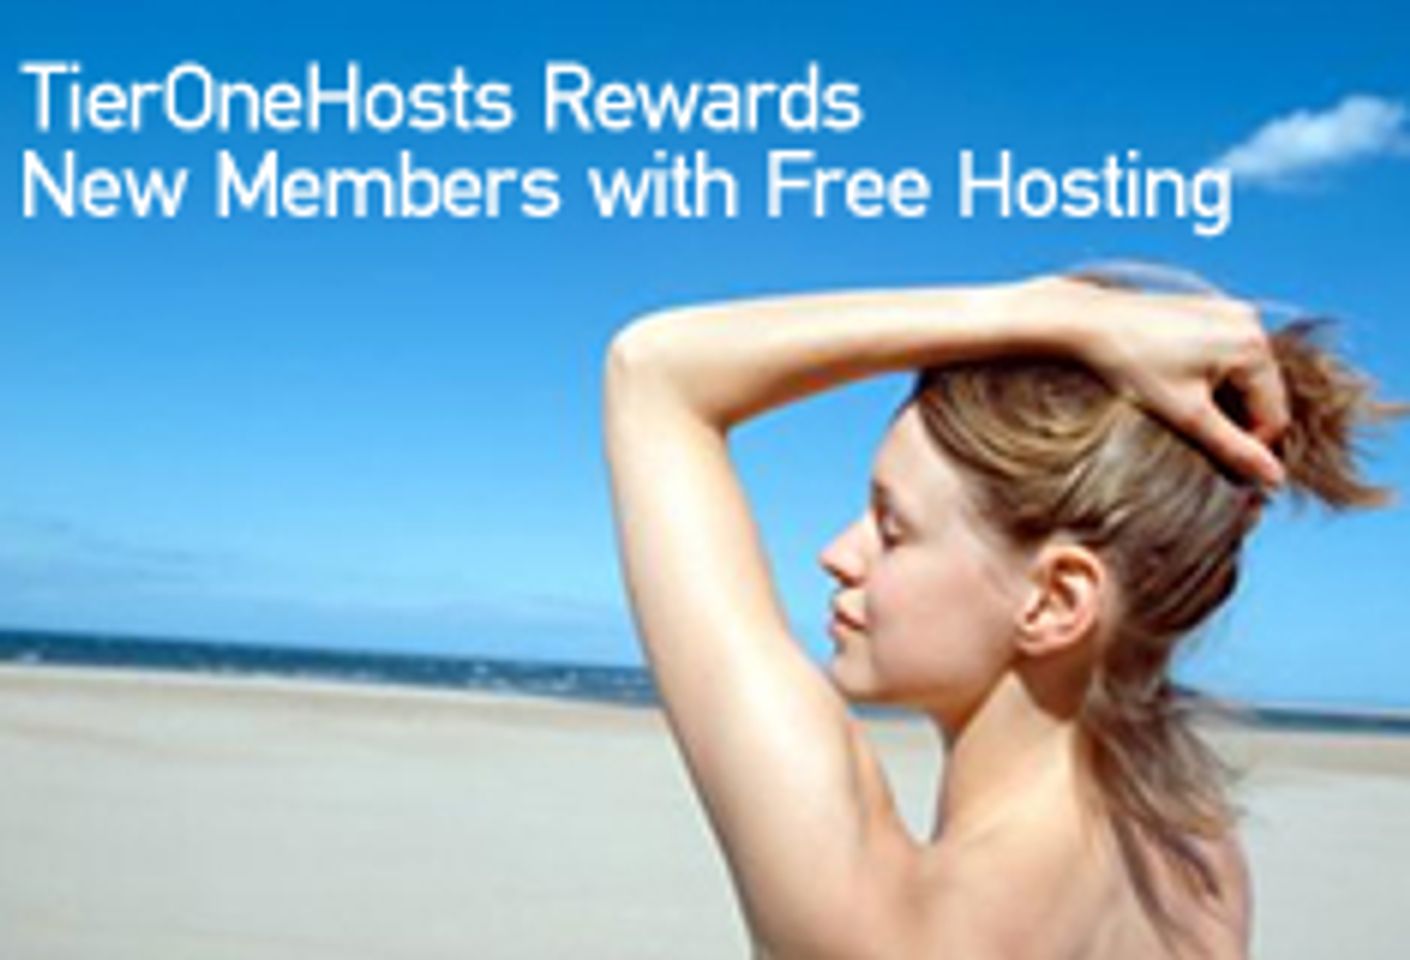 TierOneHosts Rewards New Members With Free Hosting